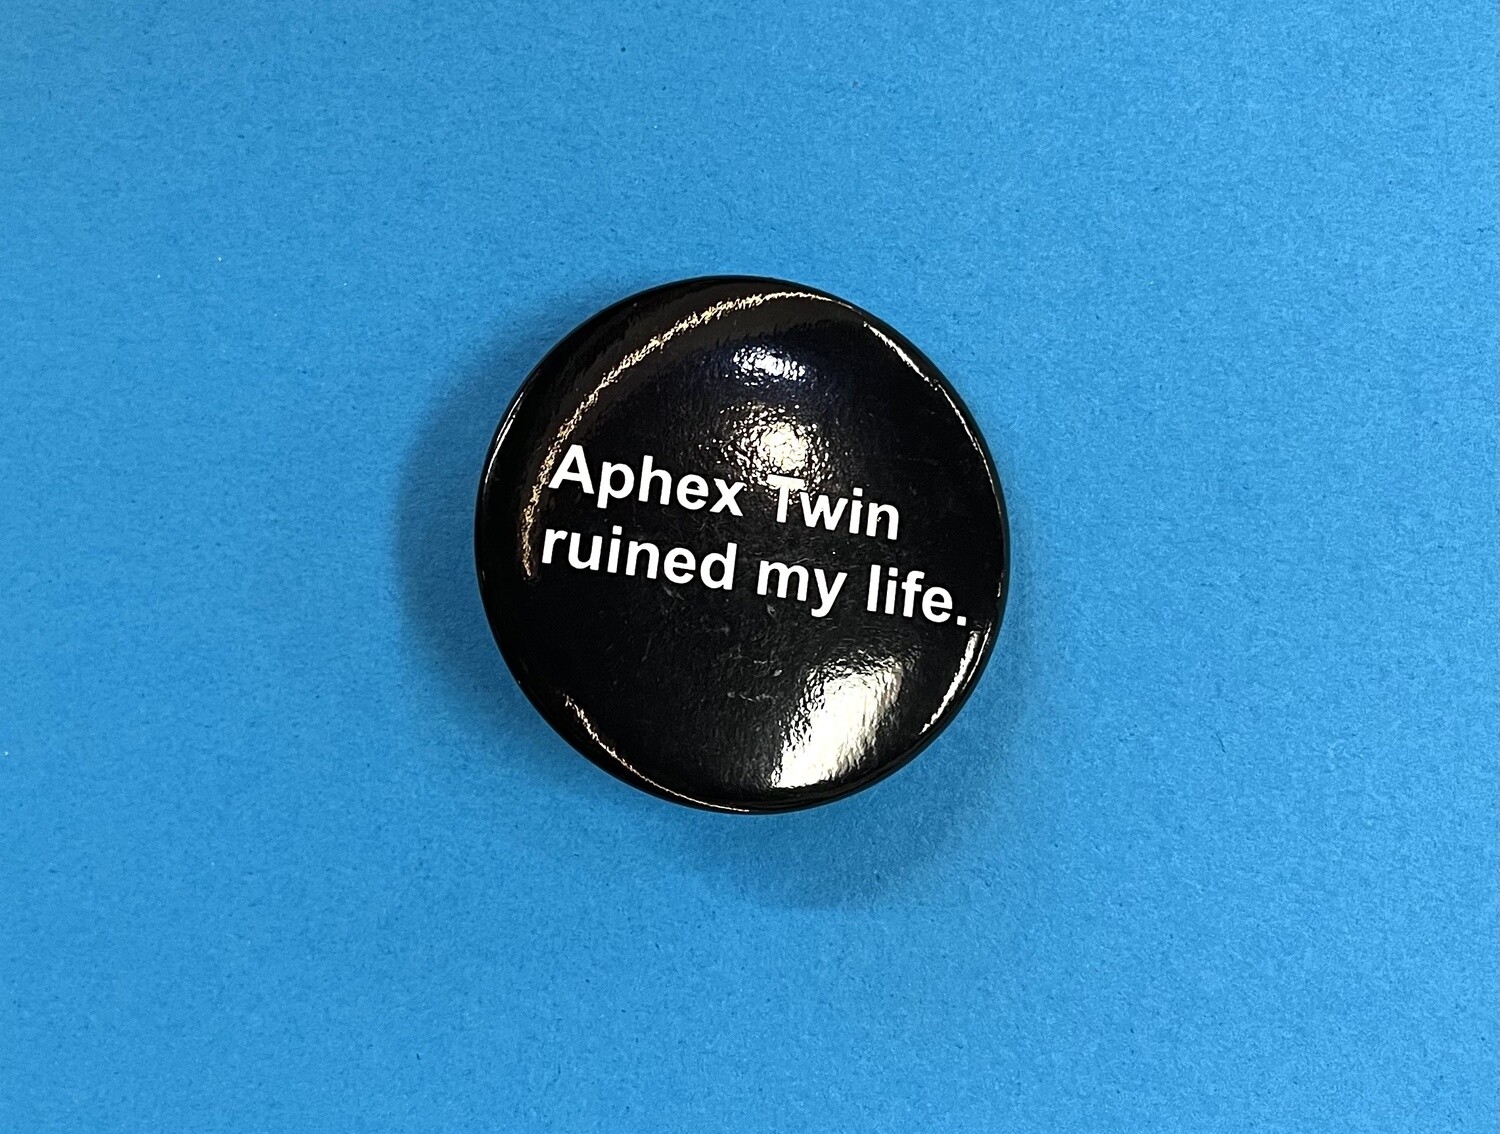 APHEX TWIN RUINED MY LIFE - Button by HOMESCHOOLKARATE